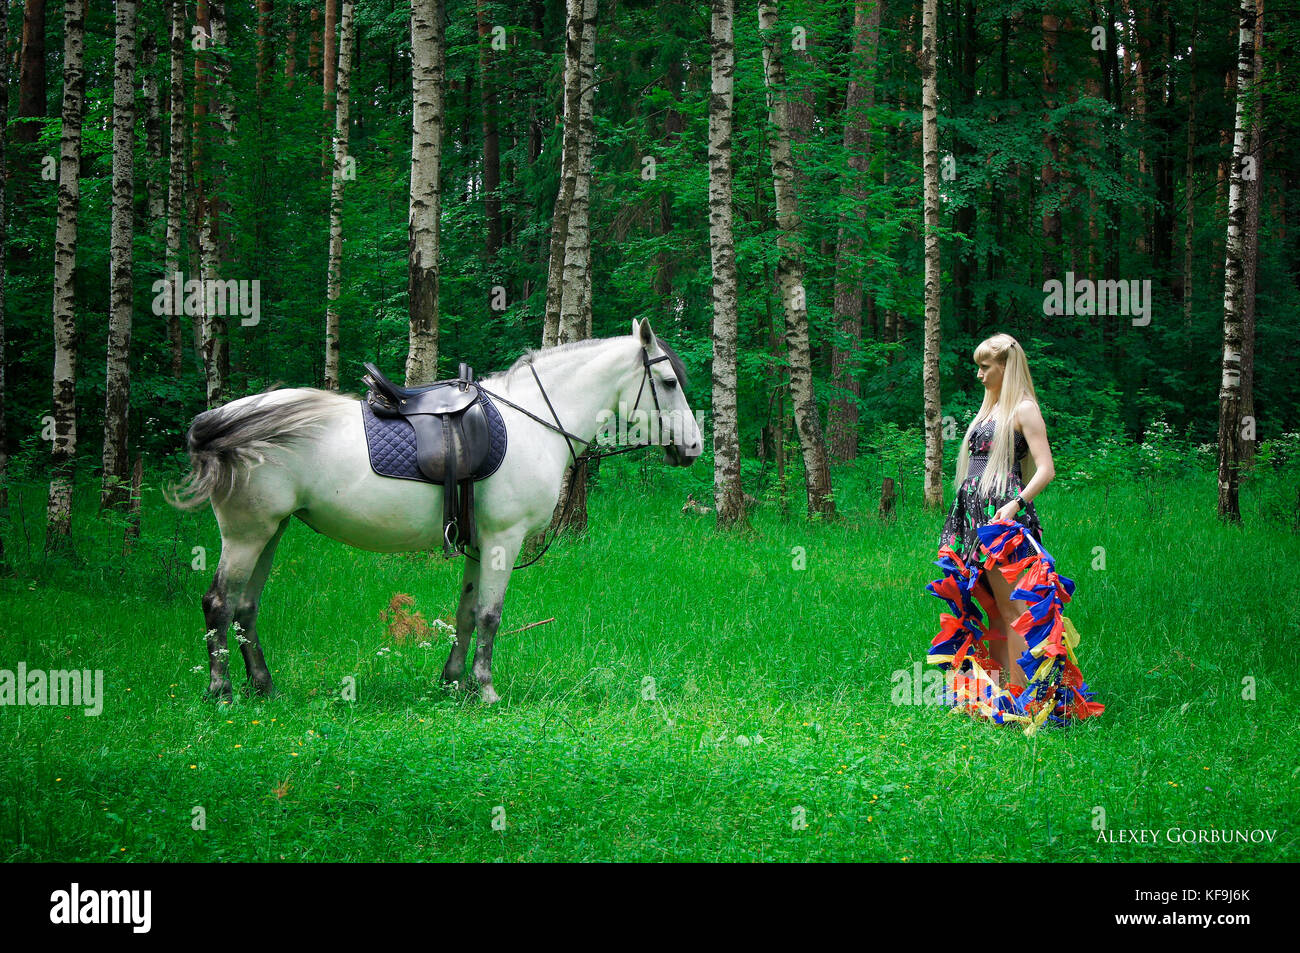 Girl and horse walking in the woods Stock Photo